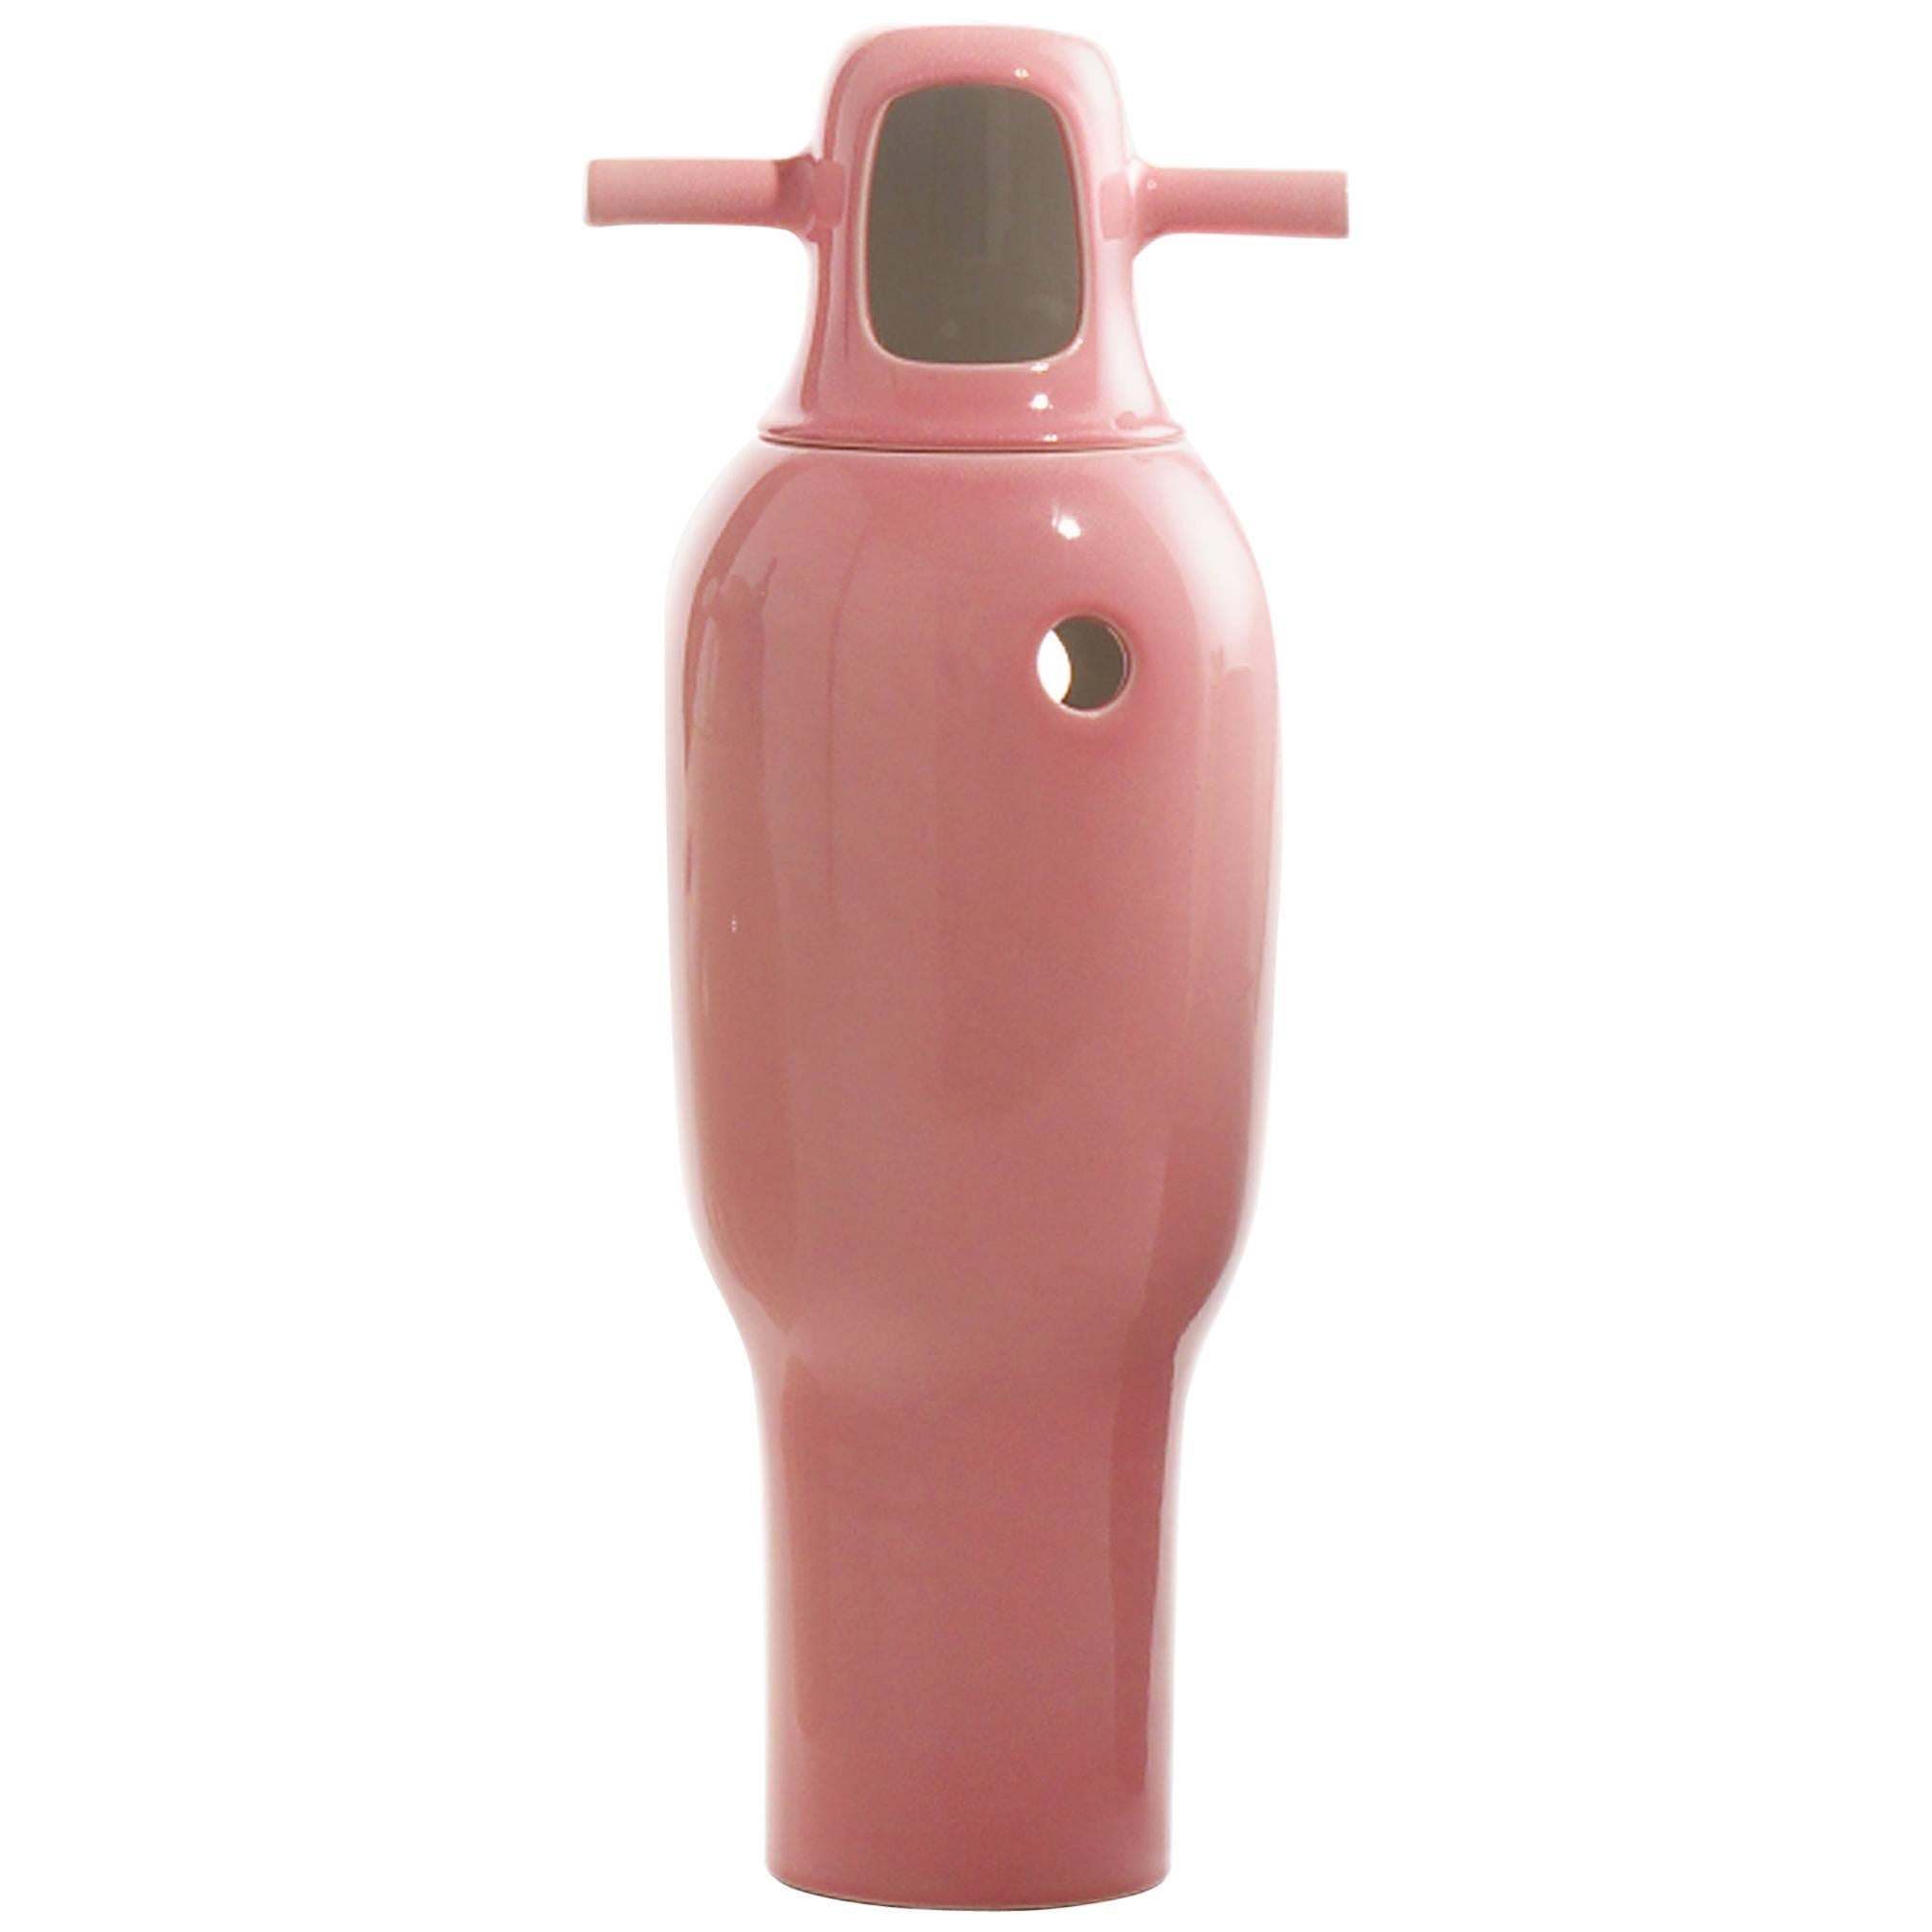 Nº 4 Contemporary Glazed Ceramic Pink Showtime  Vase Collection by Jaime Hayon